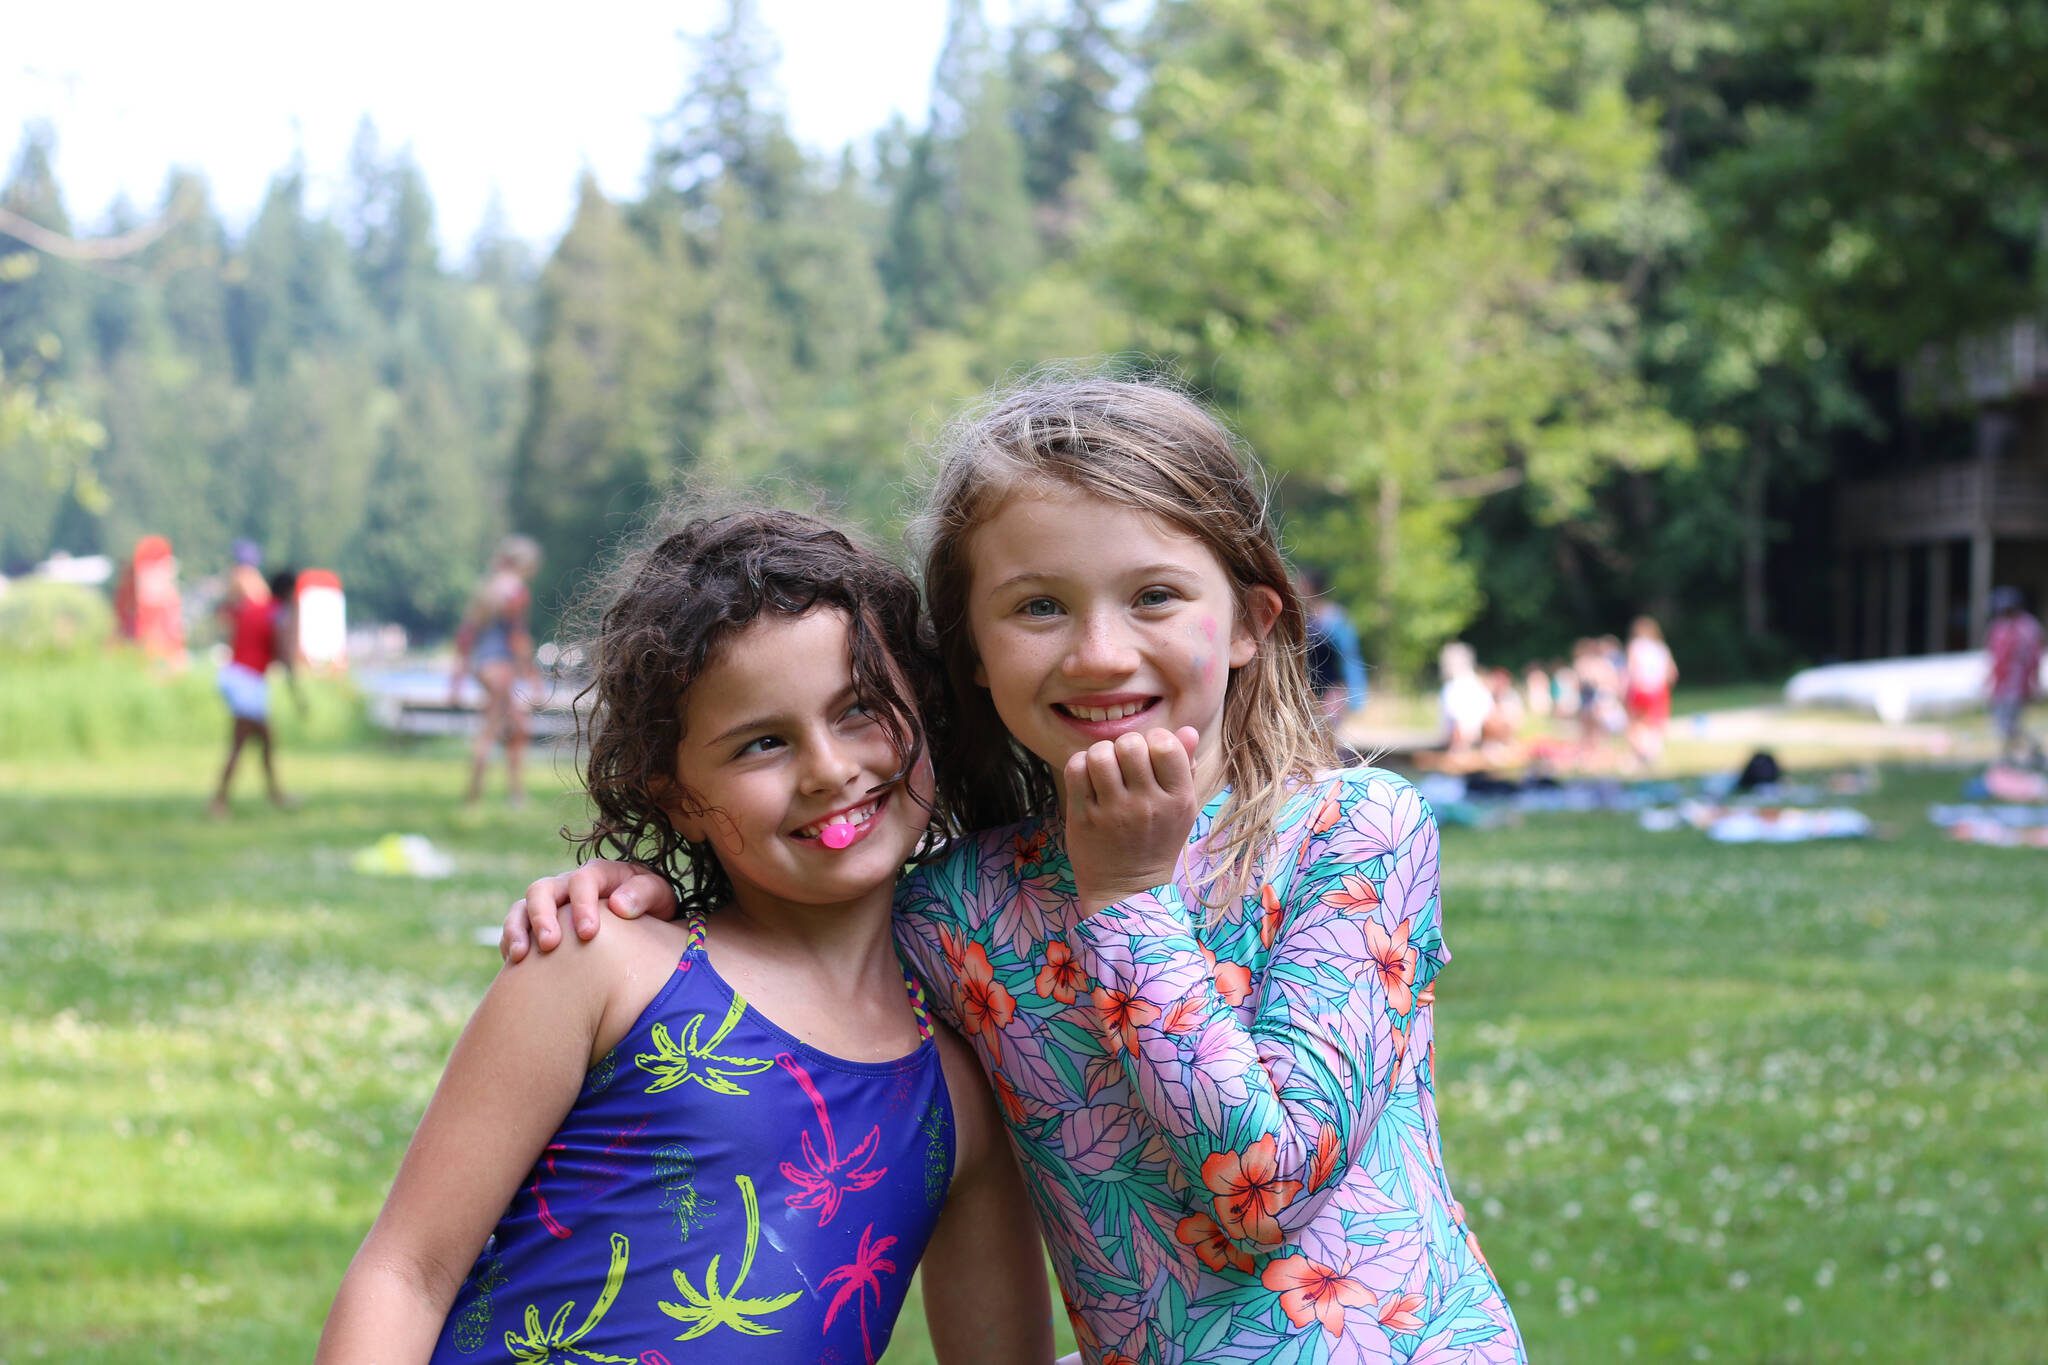 Camp Fire attendees pose after playing in the water. (Photo courtesy by Camp Fire)